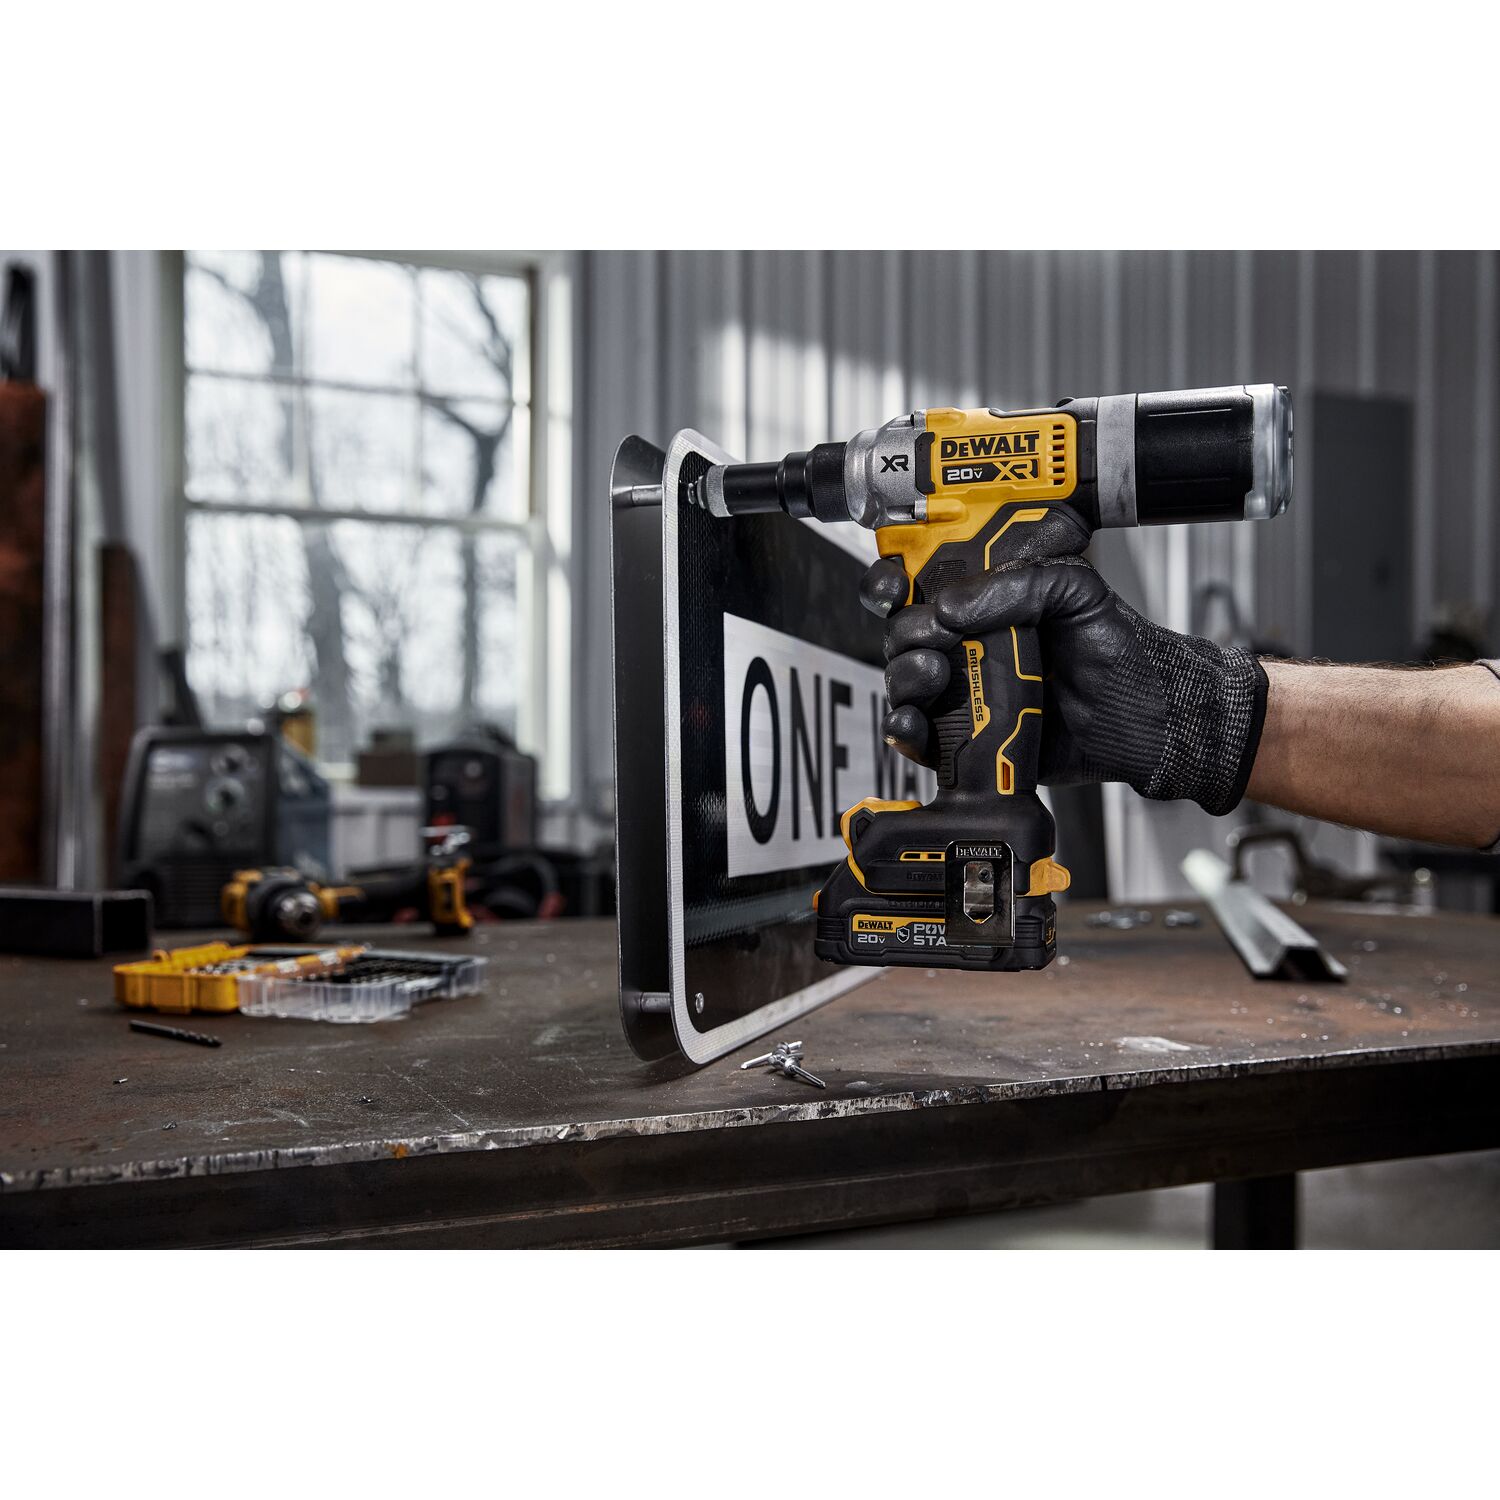 Stanley Black and Decker Press - Press Releases